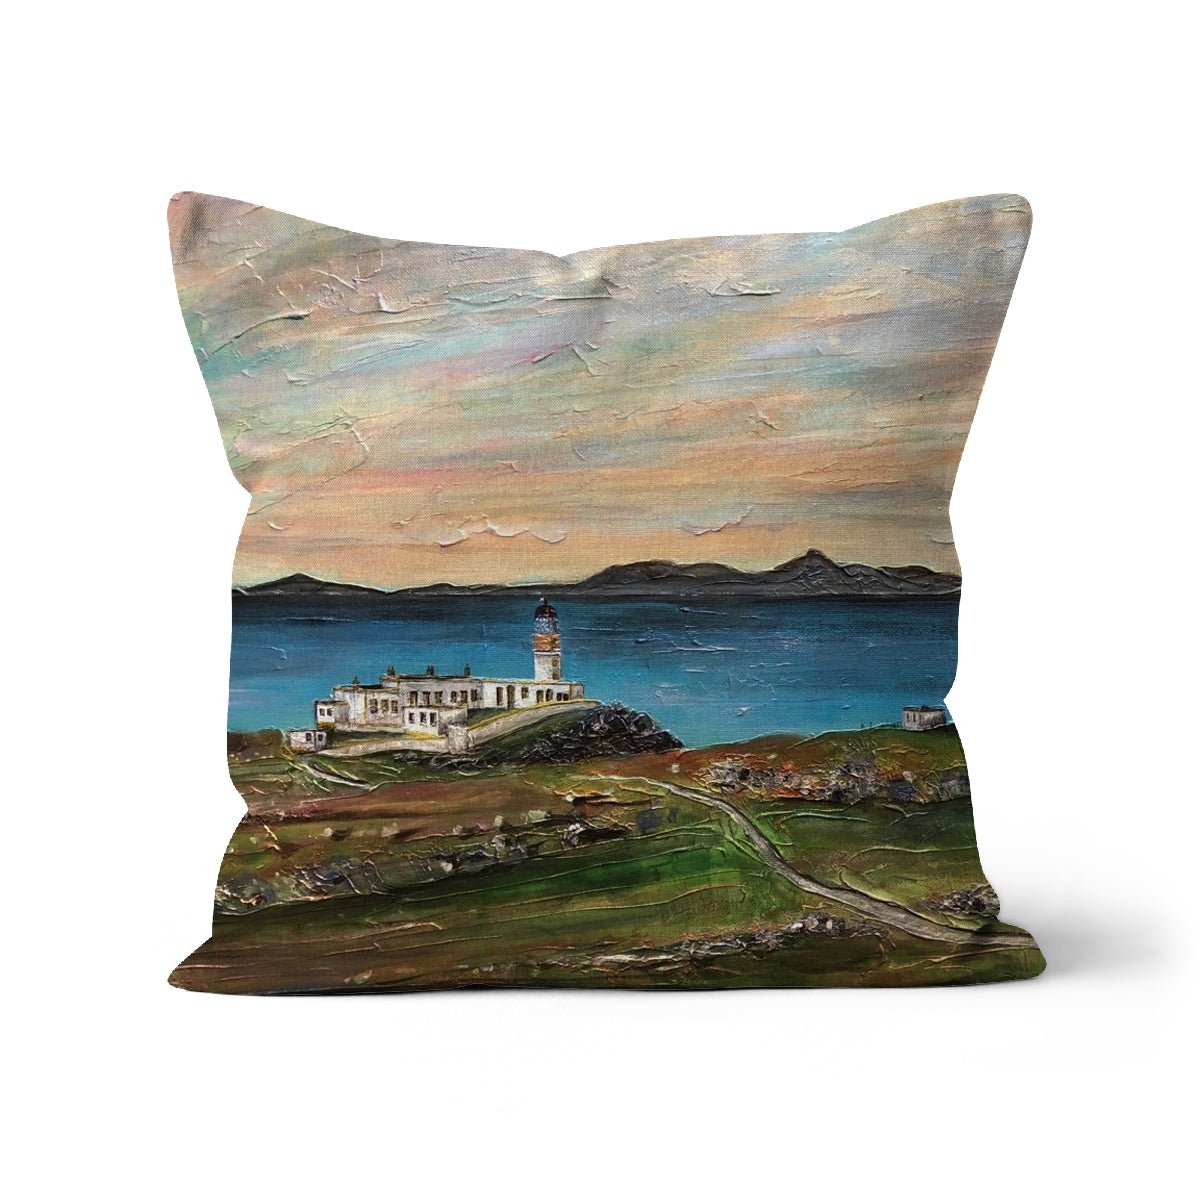 Neist Point Skye Art Gifts Cushion-Cushions-Skye Art Gallery-Canvas-22"x22"-Paintings, Prints, Homeware, Art Gifts From Scotland By Scottish Artist Kevin Hunter